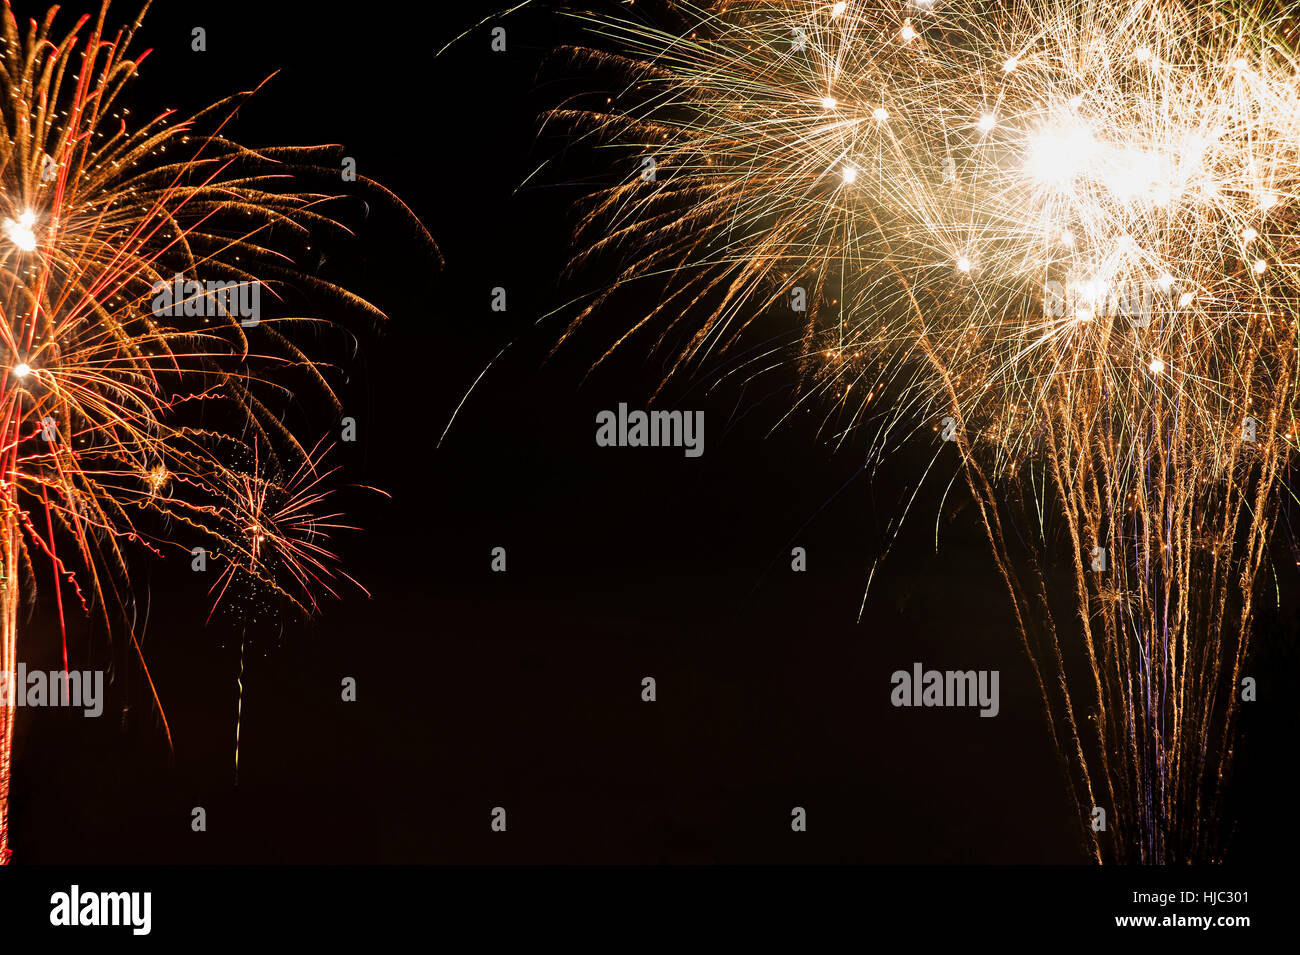 Two abstract fireworks on many locations. Stock Photo